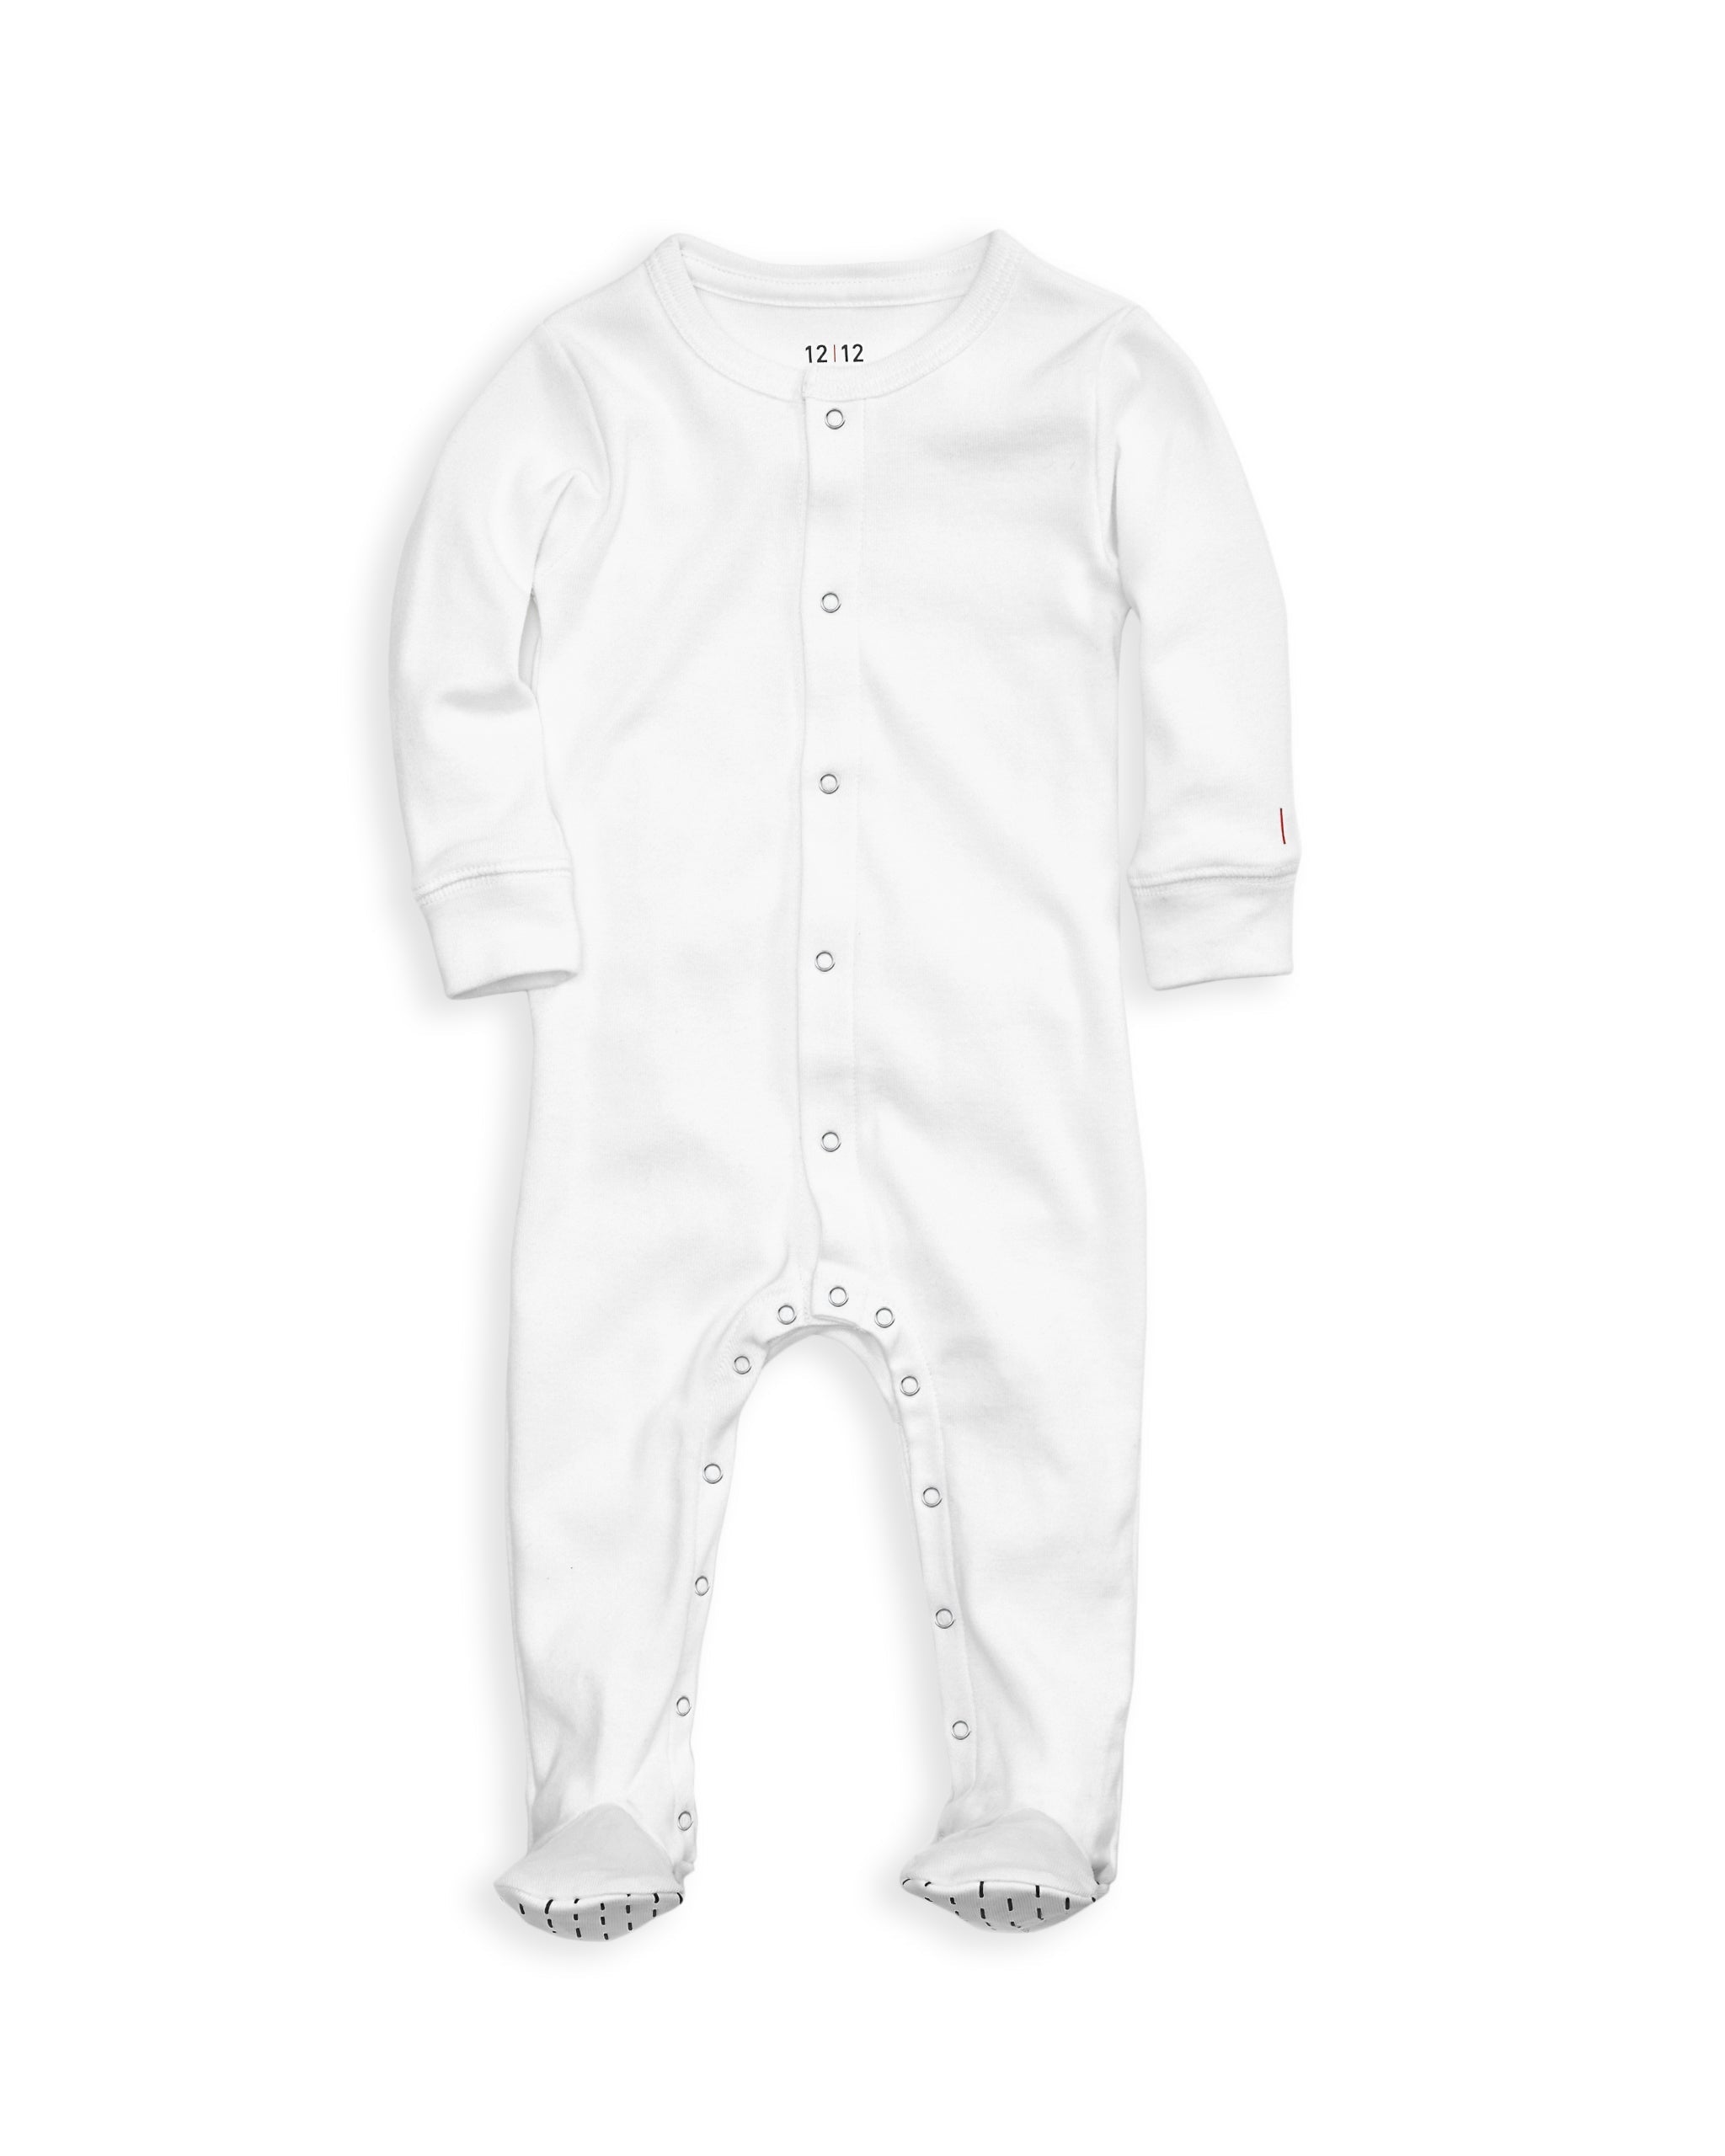 The Organic Snap Footie [White]